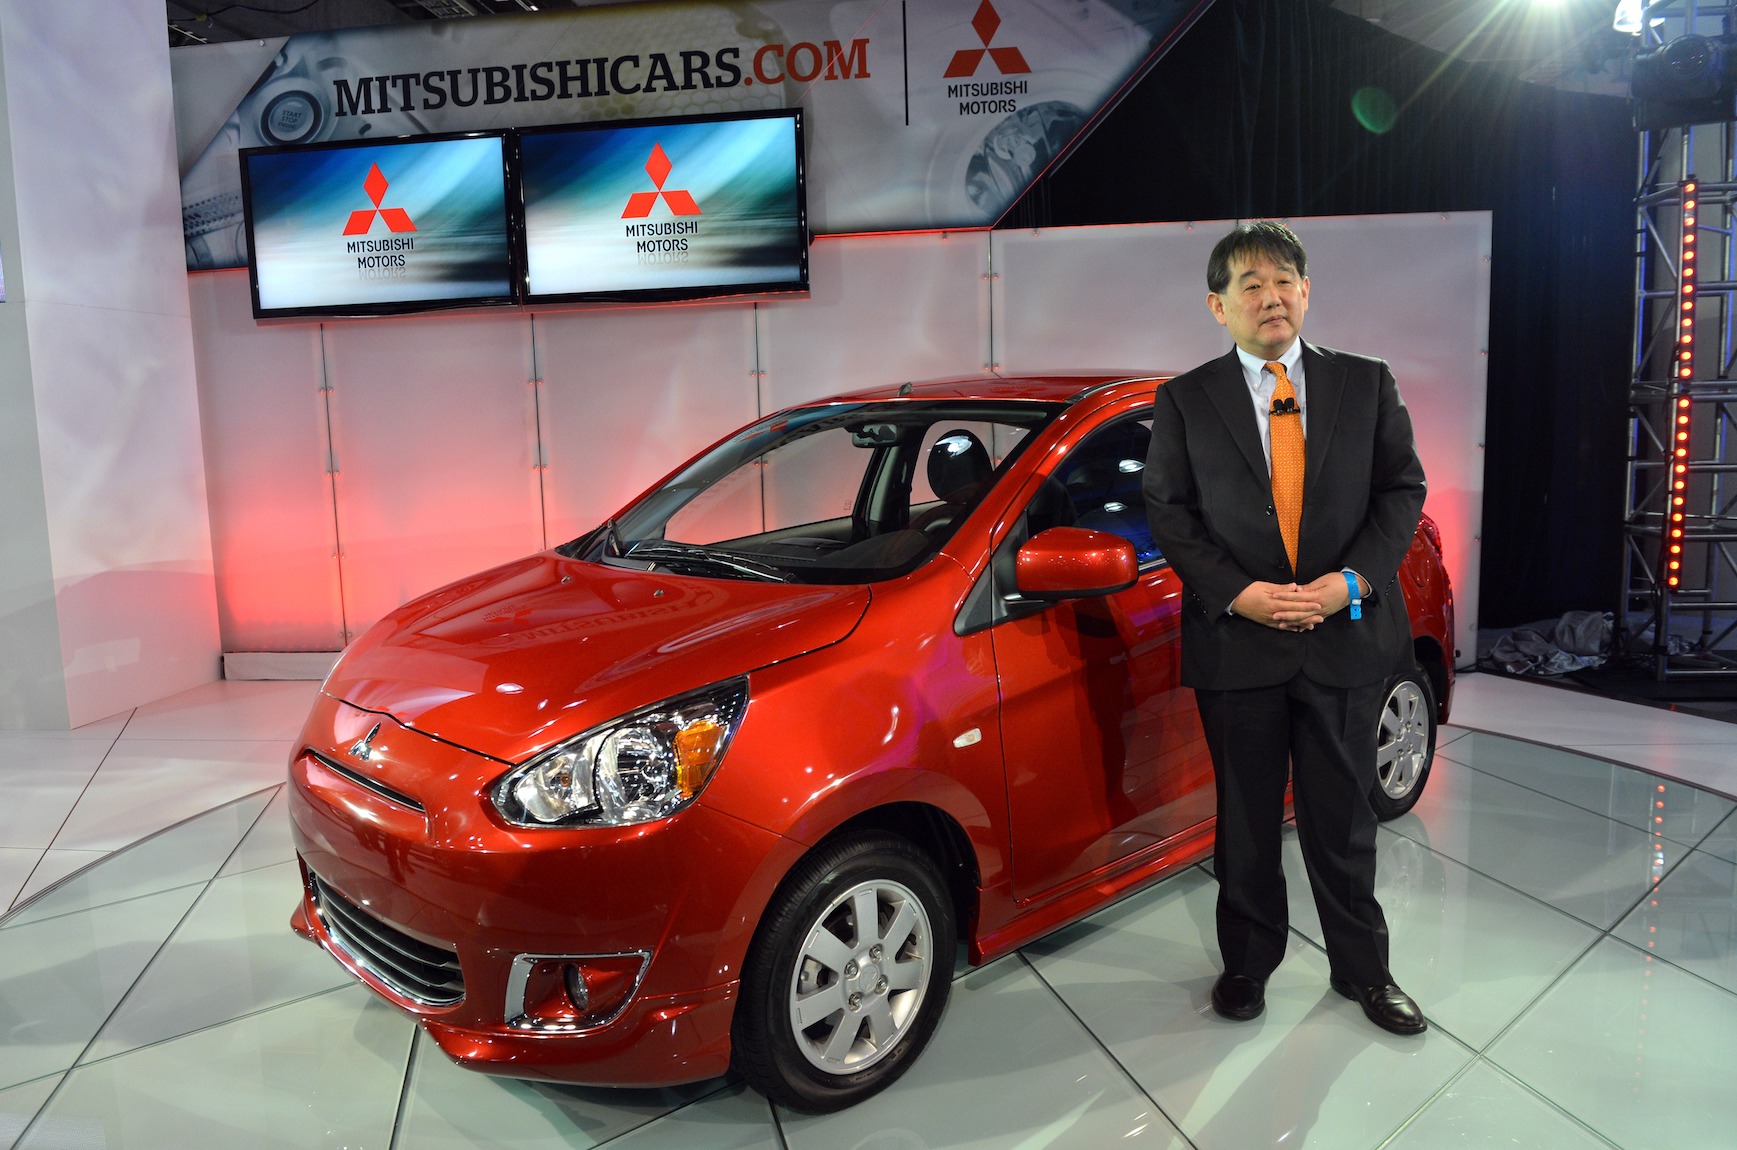 Yoichi Yokozawa in front of the 2014 Mistubishi Mirage, unveiled during the second press preview day at the New York International Automobile Show